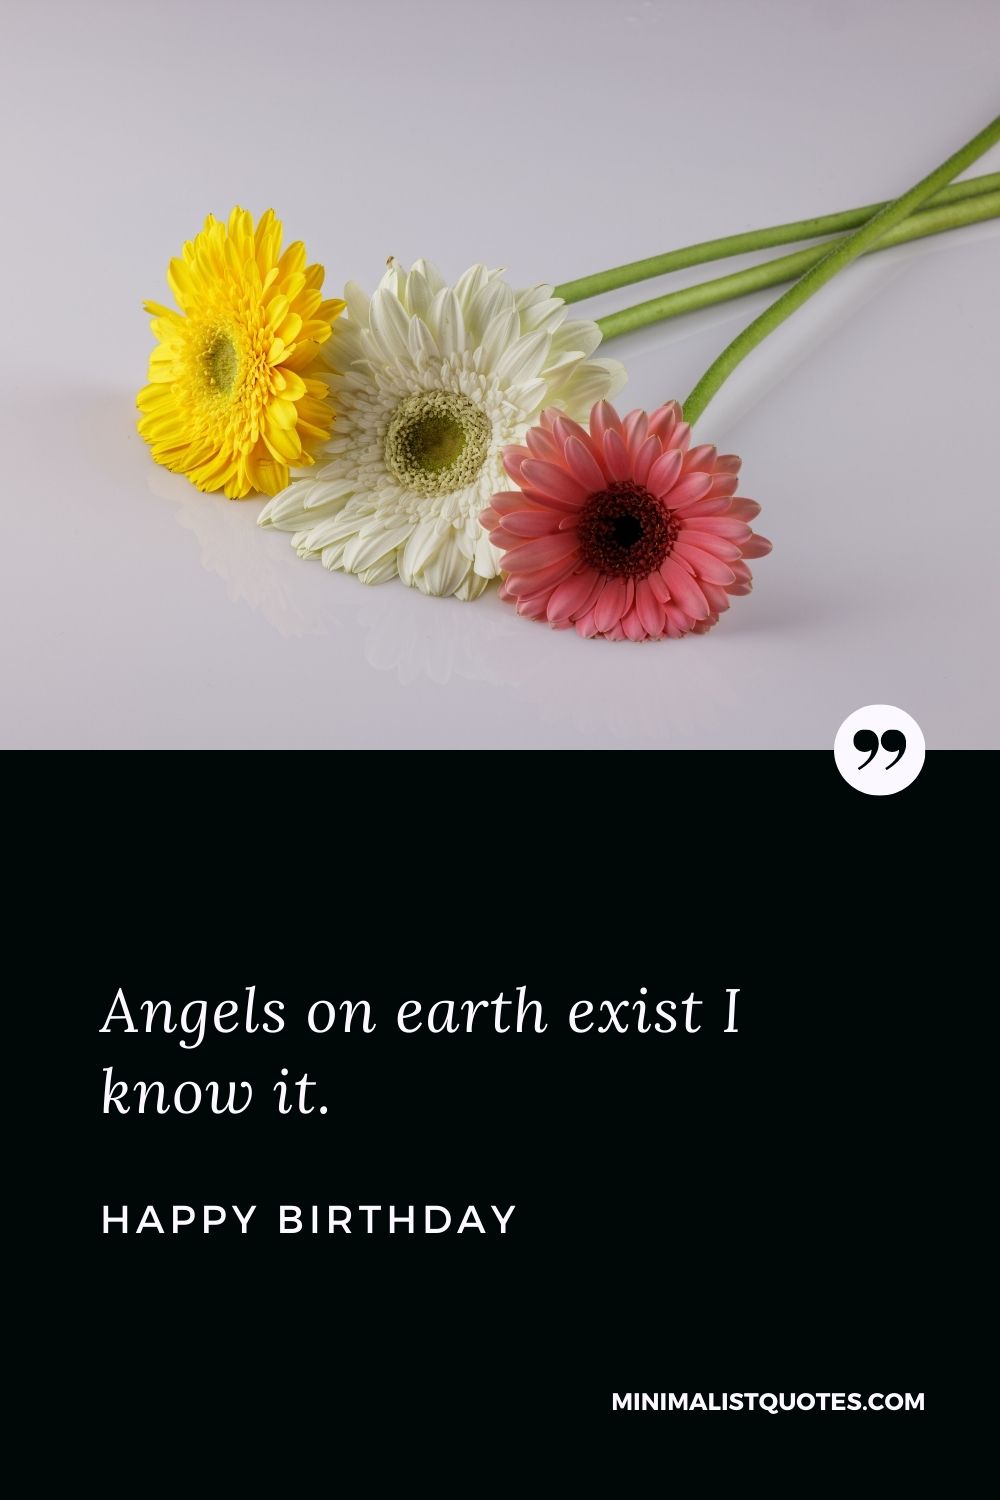 Angels on earth exist I know it. Happy Birthday!